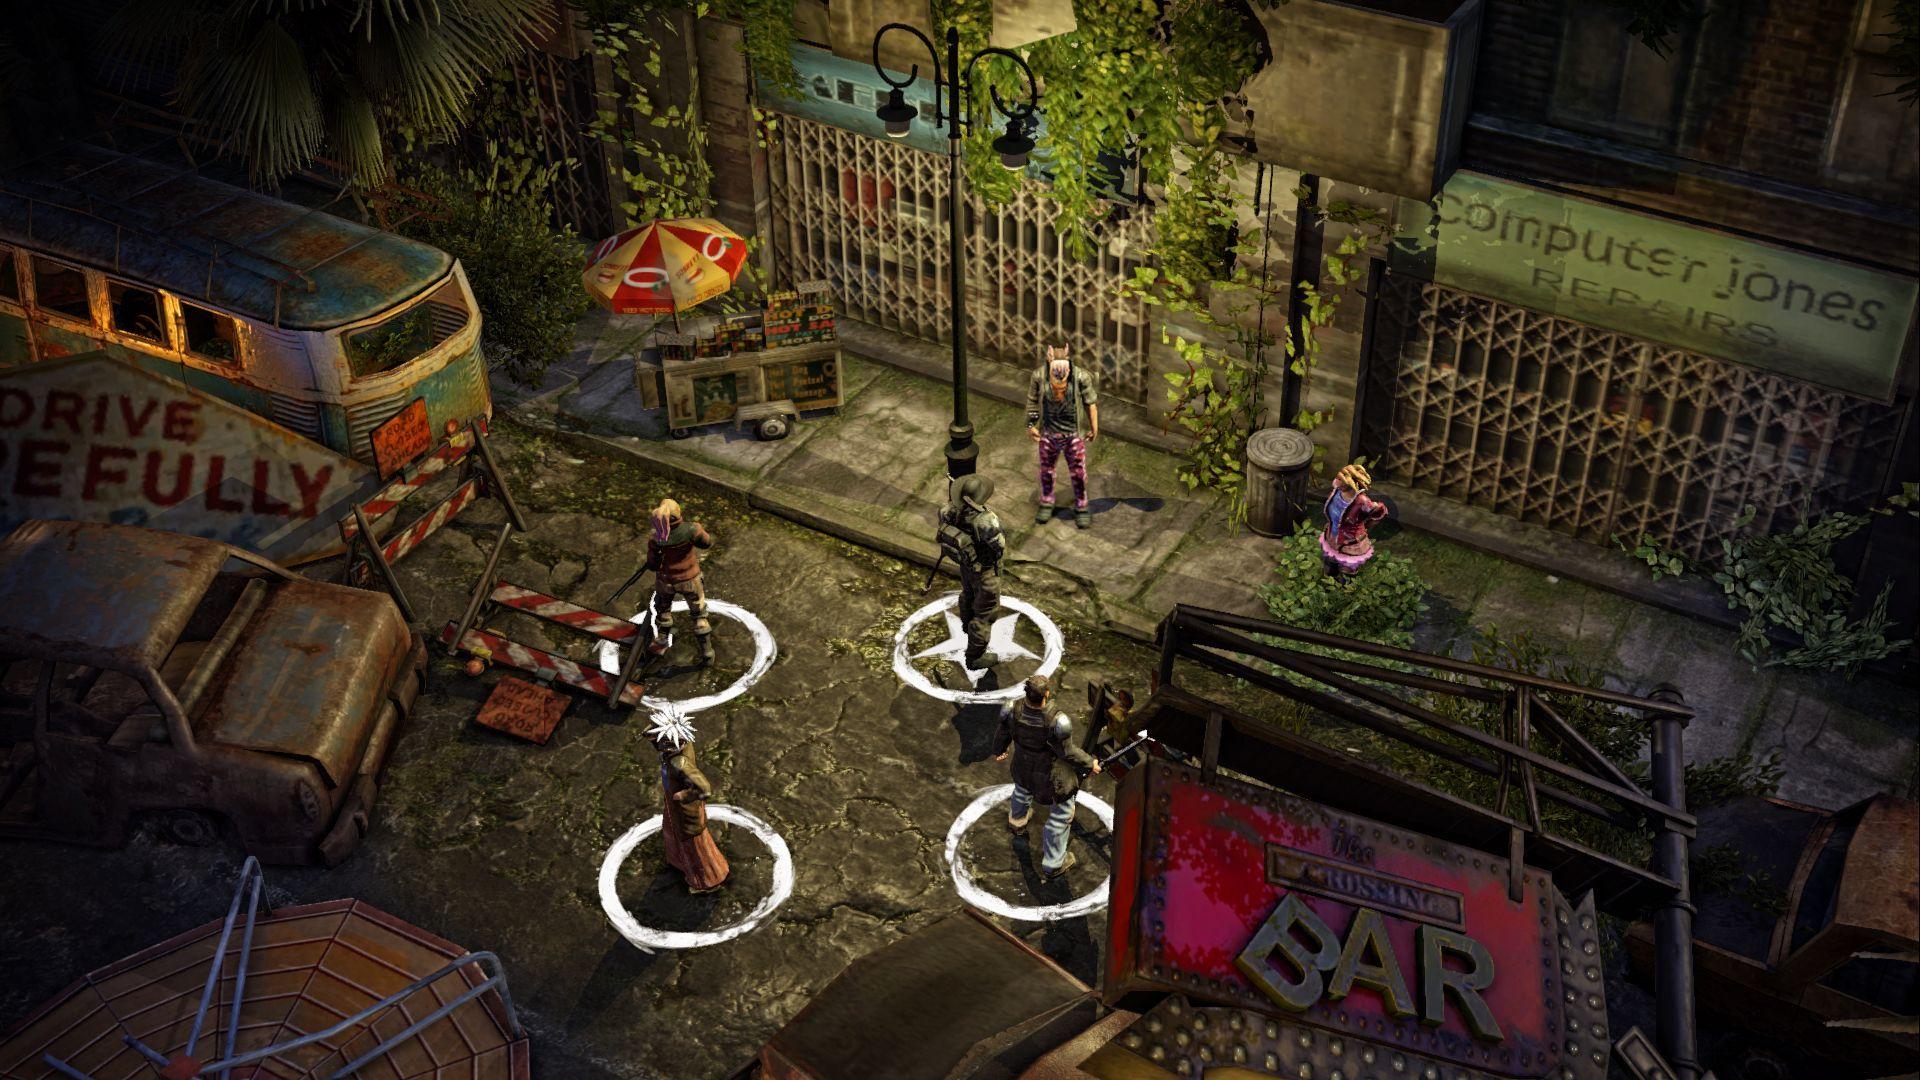 Wasteland 2 Director's Cut is coming in October